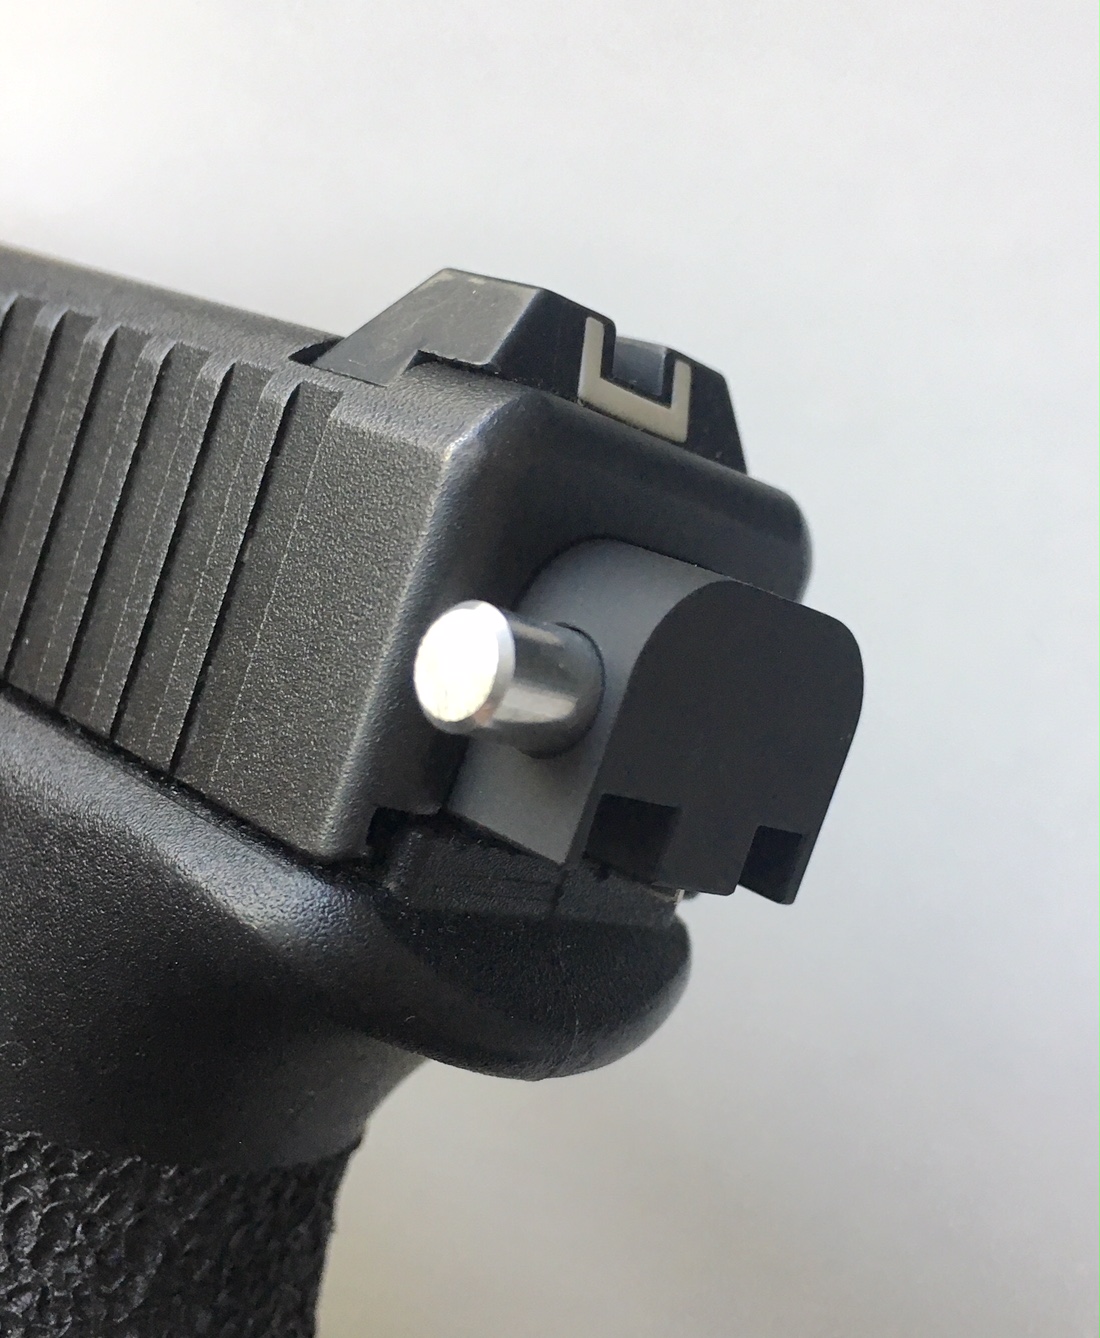 Glock full auto switch from china for sale.